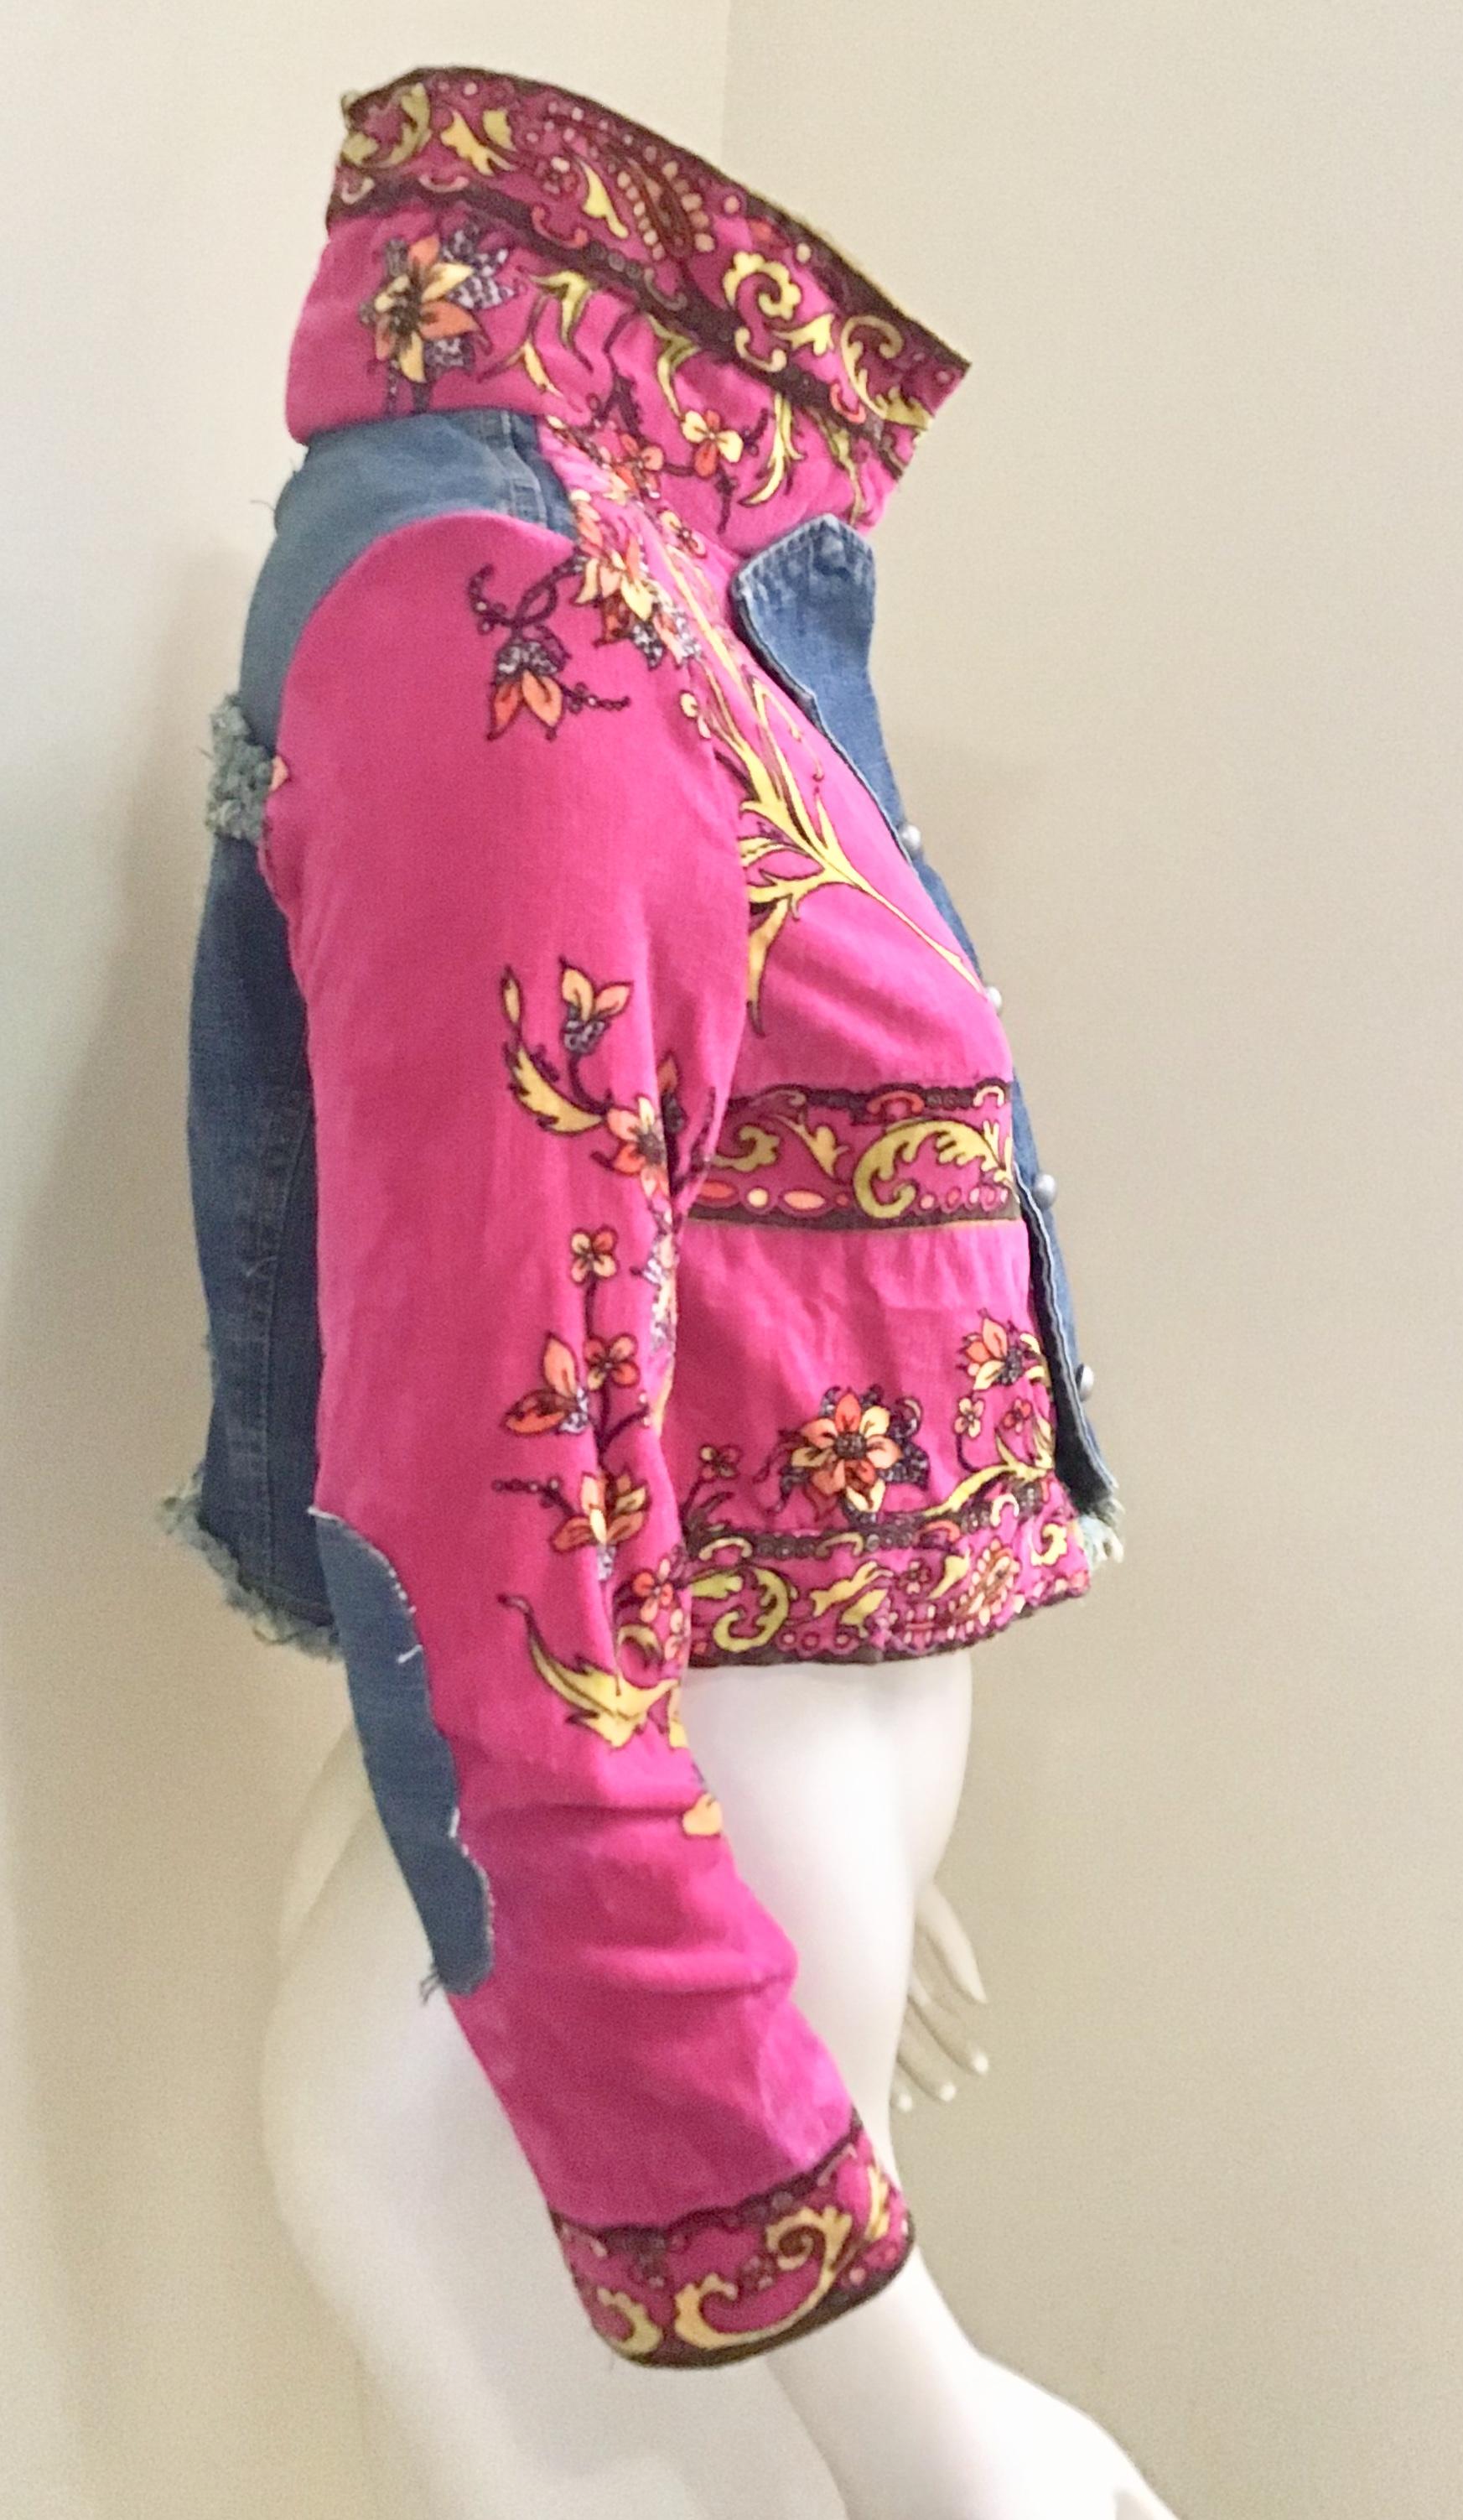 Believe it or not these started as coulottes but even before they were pants it may have been a Pucci Towel. In its 3rd reincarnation it is a super cute jacket. Using the only useable parts of the original and adding parts from a denim jacket,